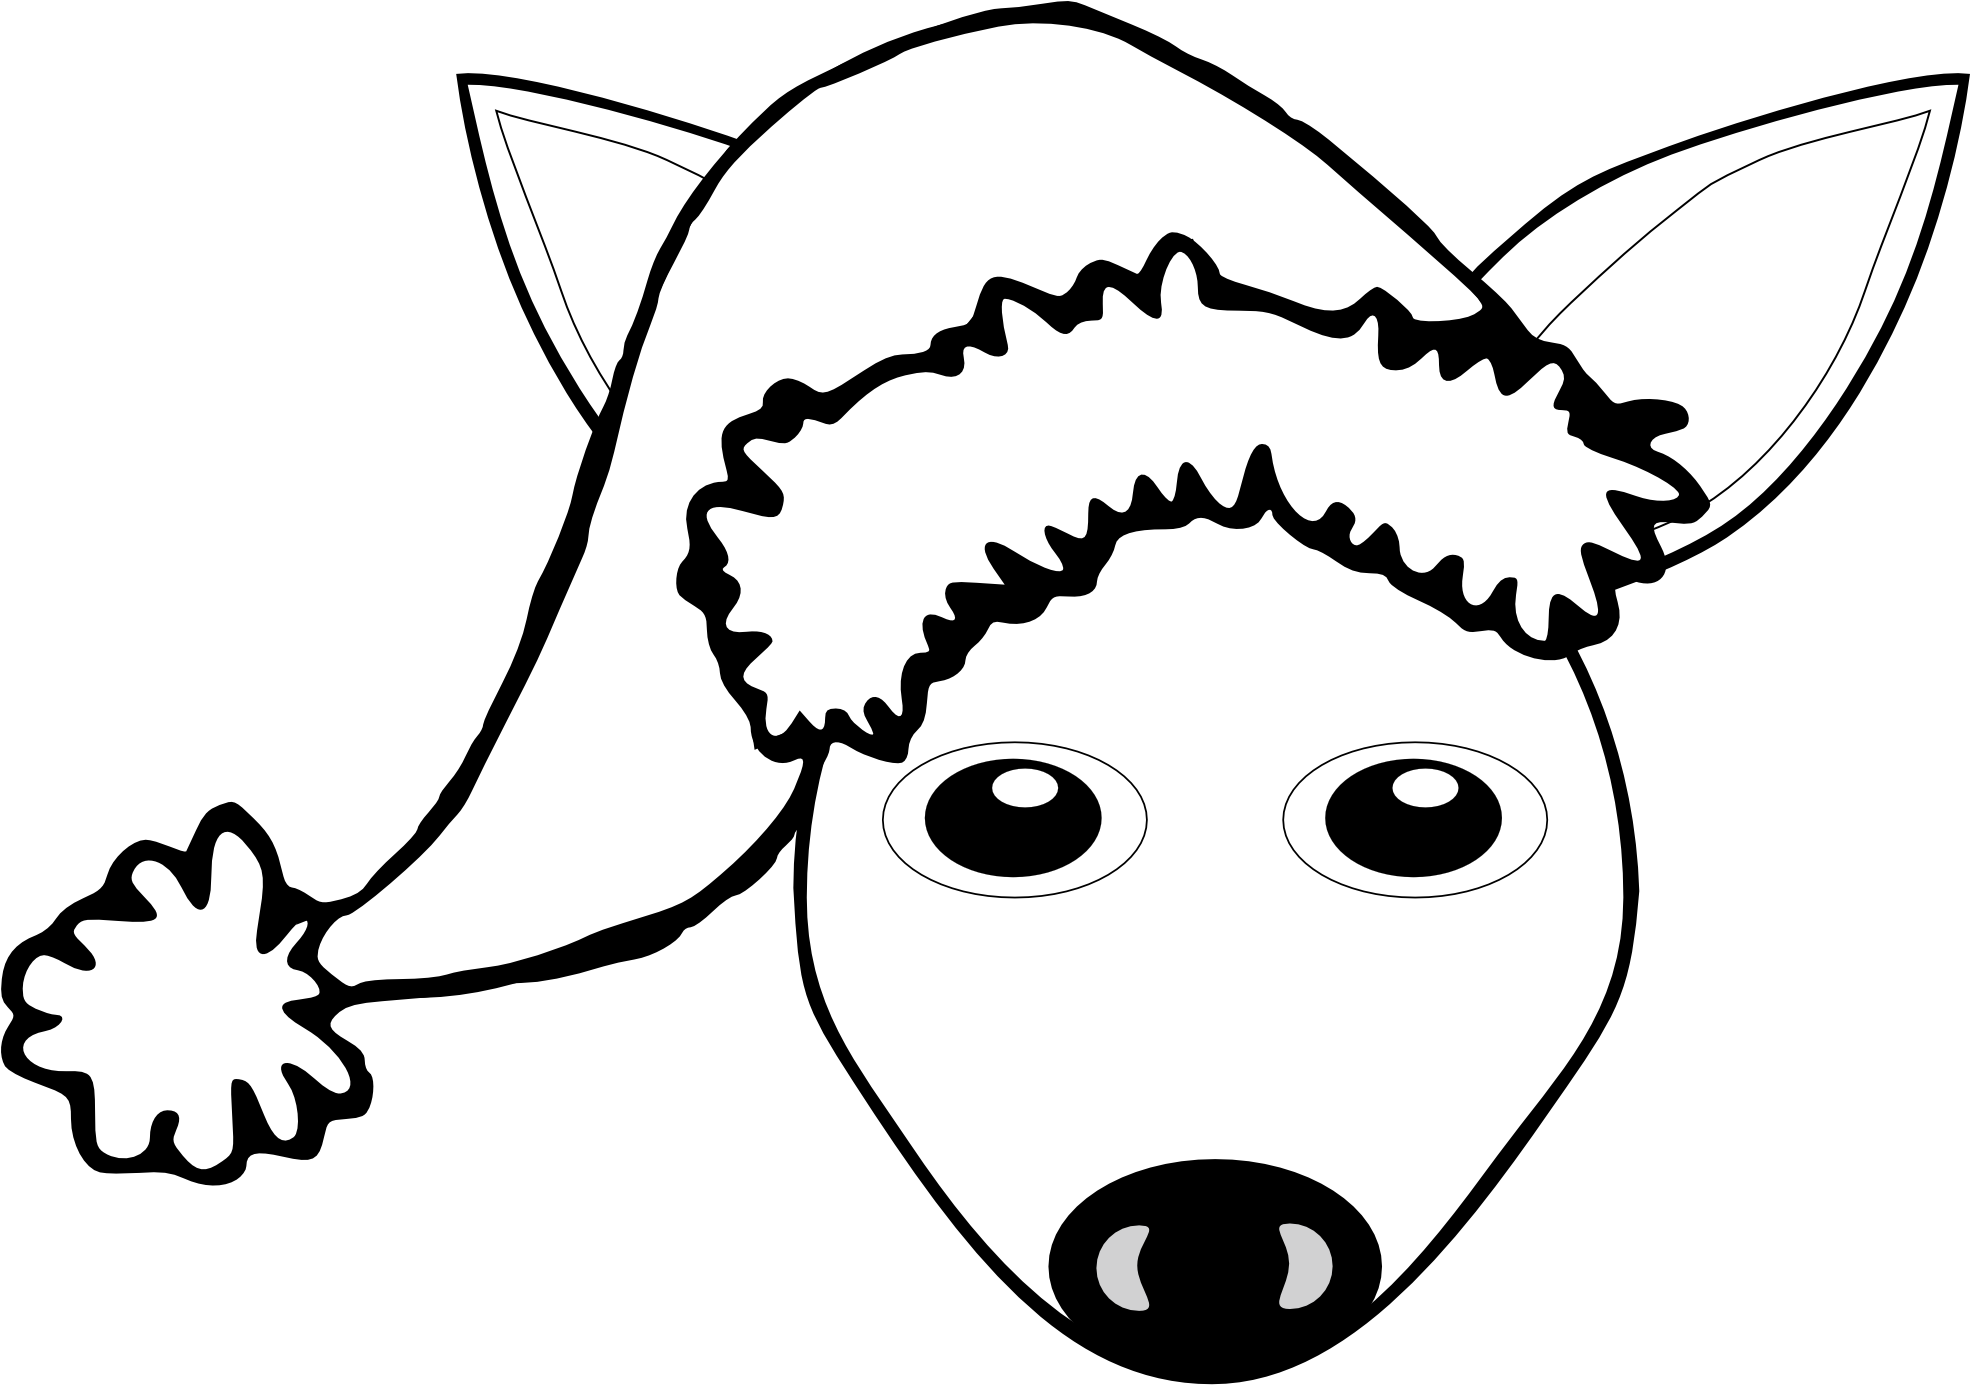 Fawn 1 Face With Santa Hat Black White Line Art Christmas - Fawn 1 Face With Santa Hat Black White Line Art Christmas (1969x1516)